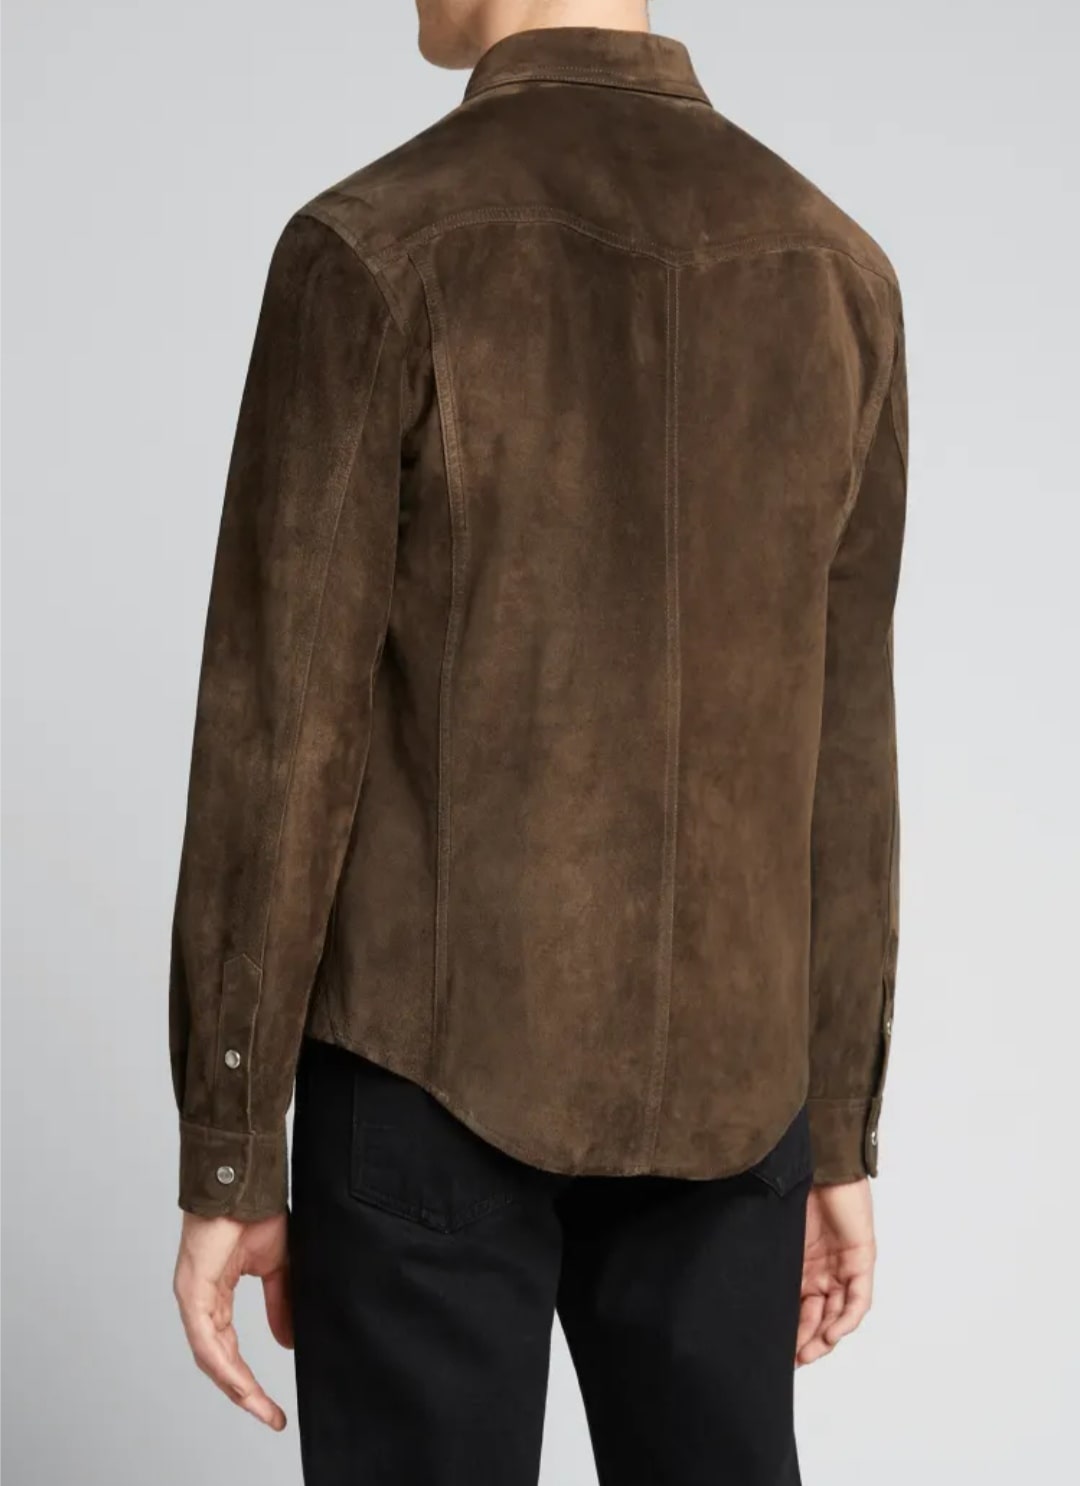 Men’s Classic Chocolate Brown Suede Leather Shirt